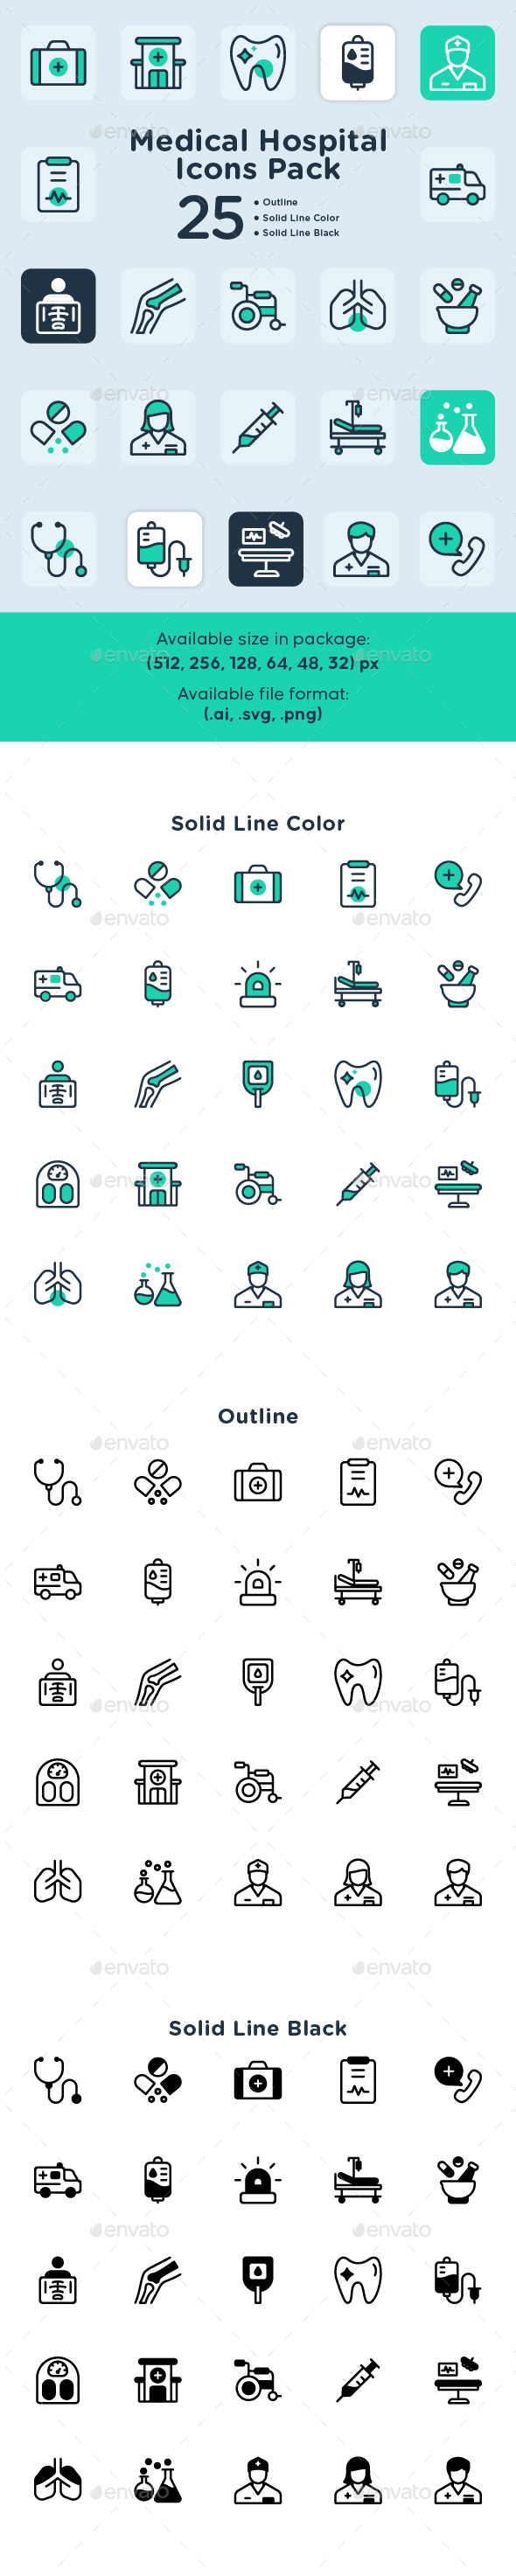 Medical Hospital Icons Pack